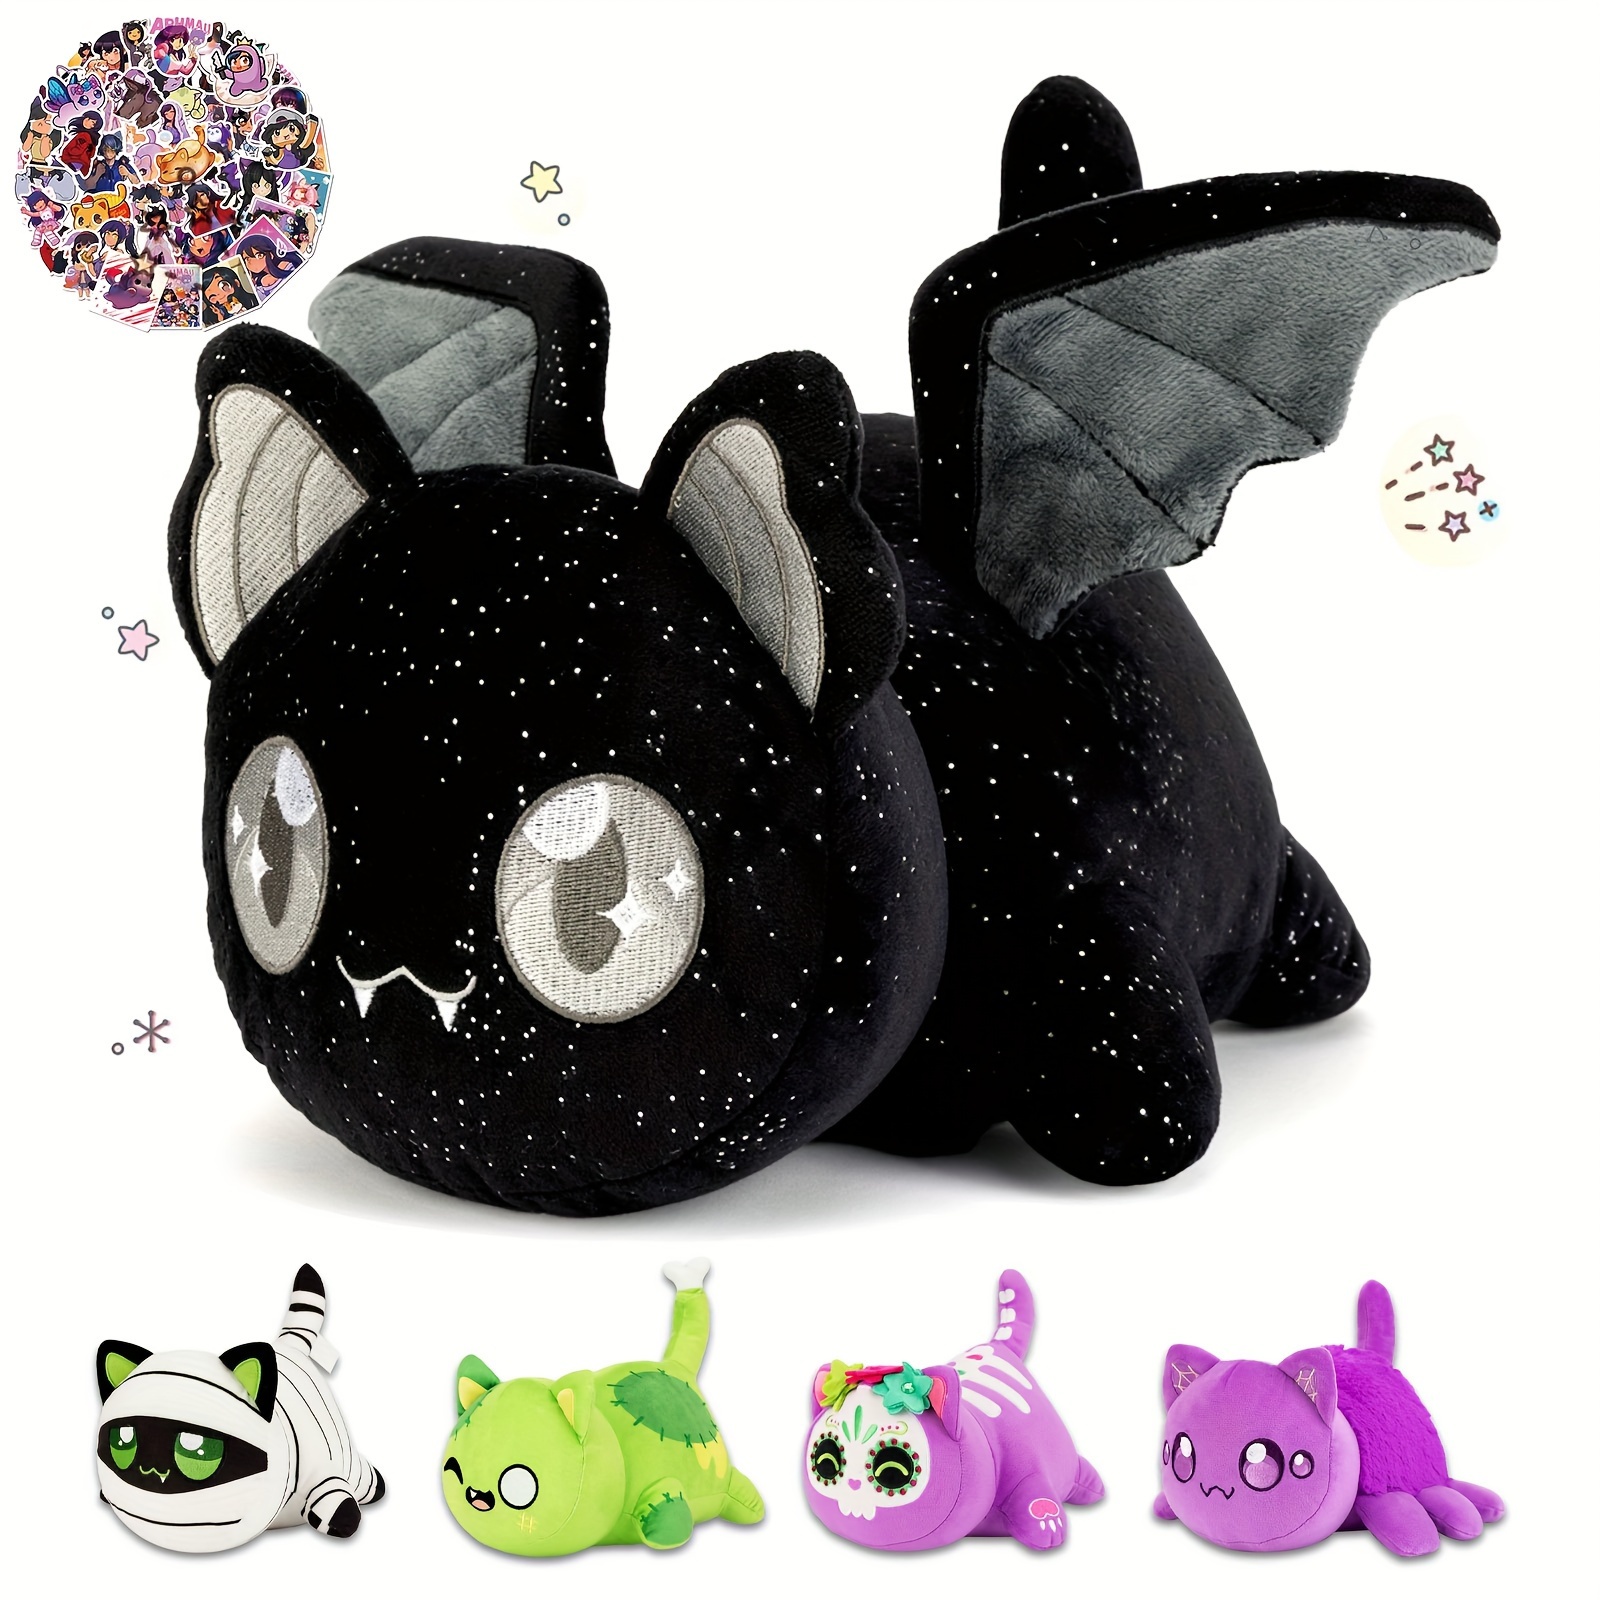 

Splushmow® Cute Meemeows Bat Cat Plush, Spider Cat Plush, Cat Plush, Purple Sugar Cat Plush, Zombie Cat Plush, Doll Birthday, Party Gift For Kids Girlfriend And Fans Valentine's Day